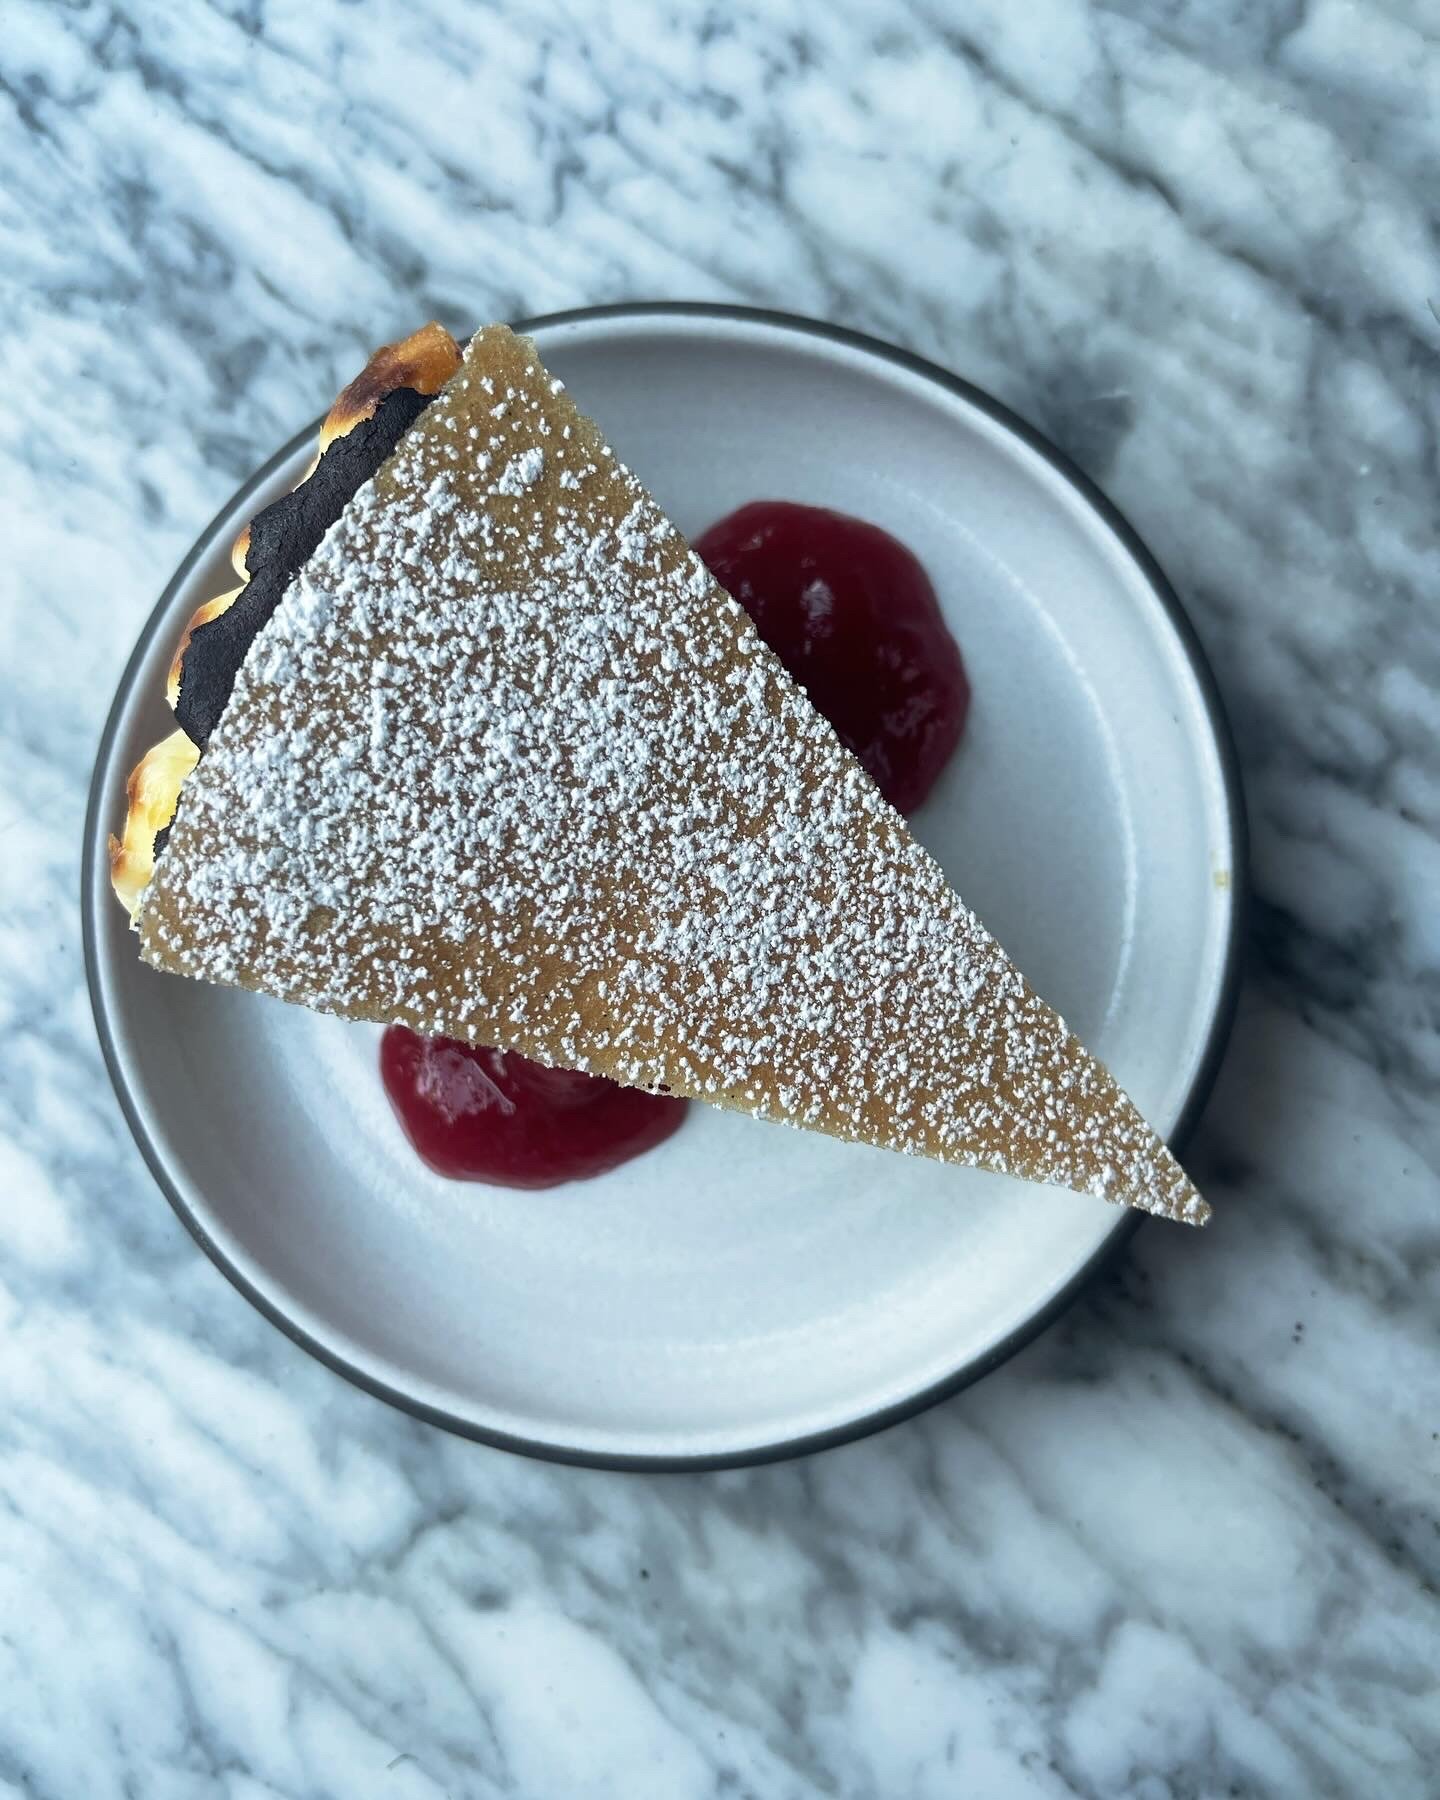 BASQUE CHEESECAKE so good that it hasn't come off the menu due to our obsession. #sofluffy #basquecheesecake #pastry #ballard #seattle